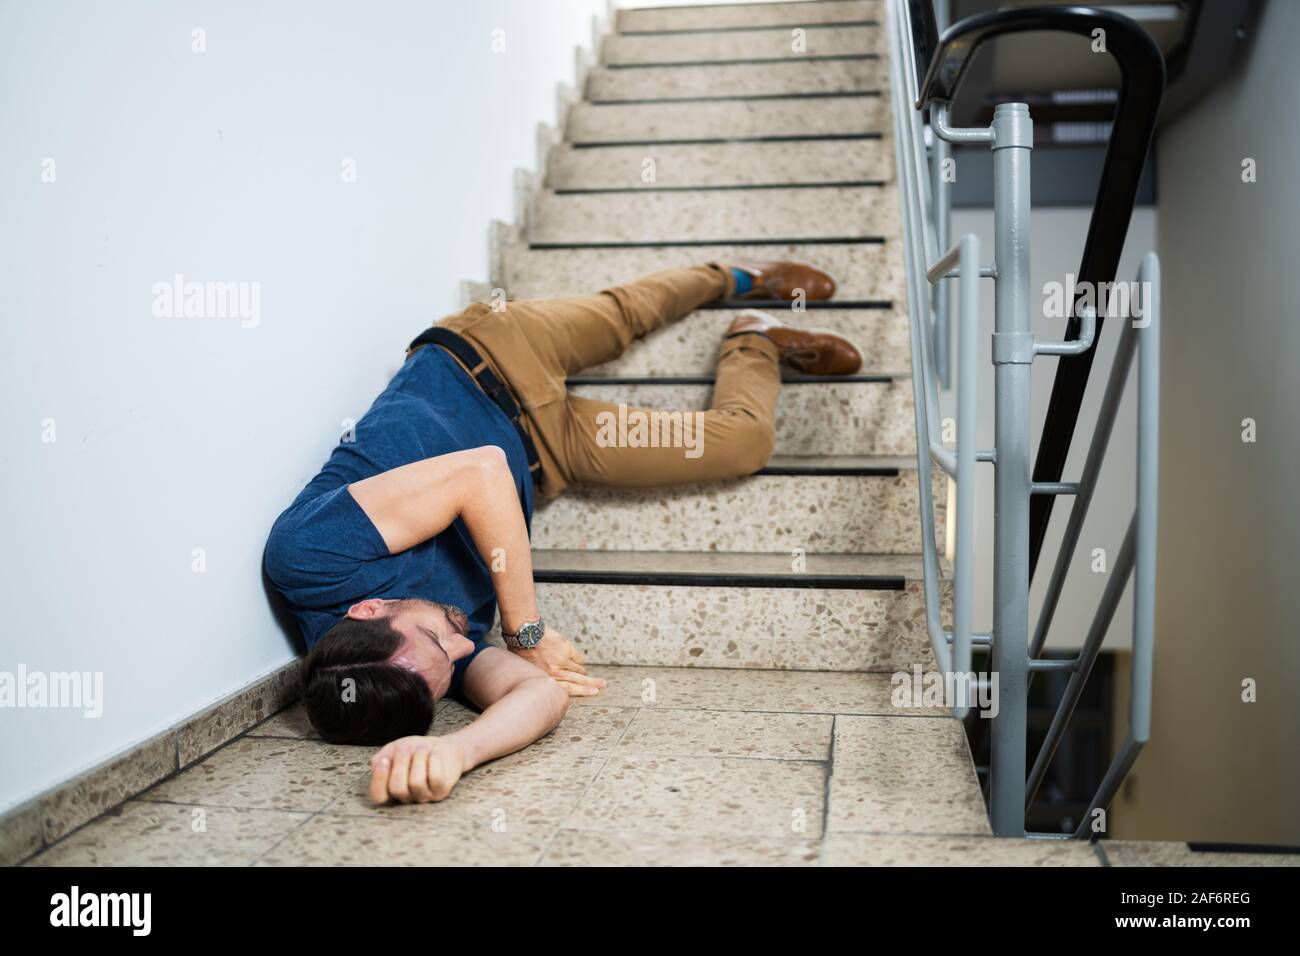 Man On Stair Near To Fall Down Stock Photo, Picture and Royalty Free Image.  Image 17541996.